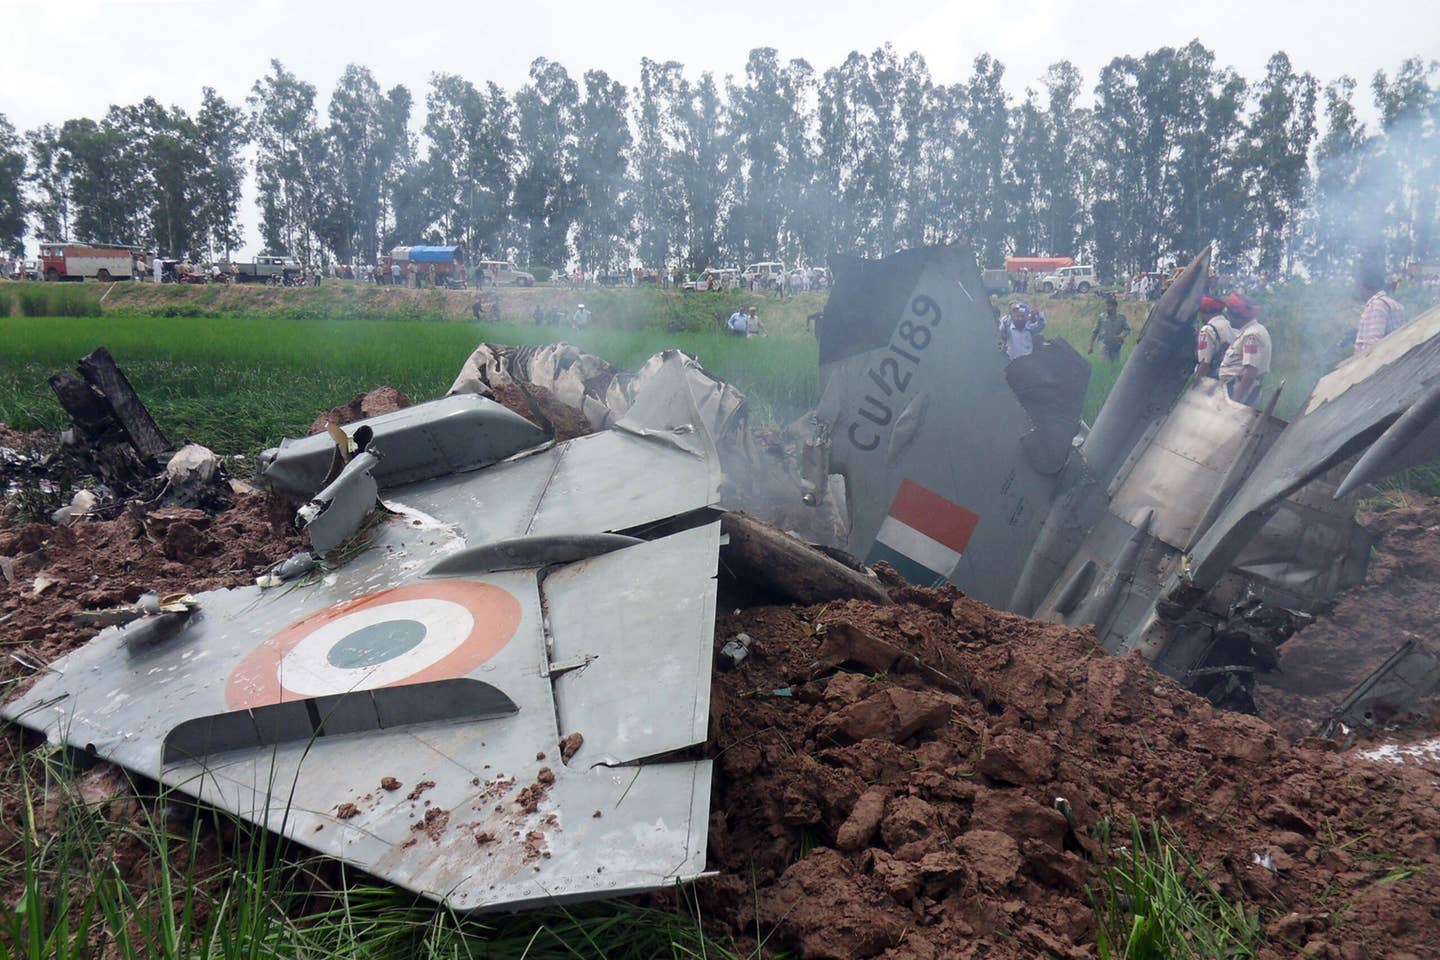 Indian Air Force personnel stand by the wreckage of a MiG-21 Bison that crashed in a field in Rajgarh, in Patiala district, in the northern state of Punjab, on September 6, 2011. <em>STR/AFP via Getty Images</em>